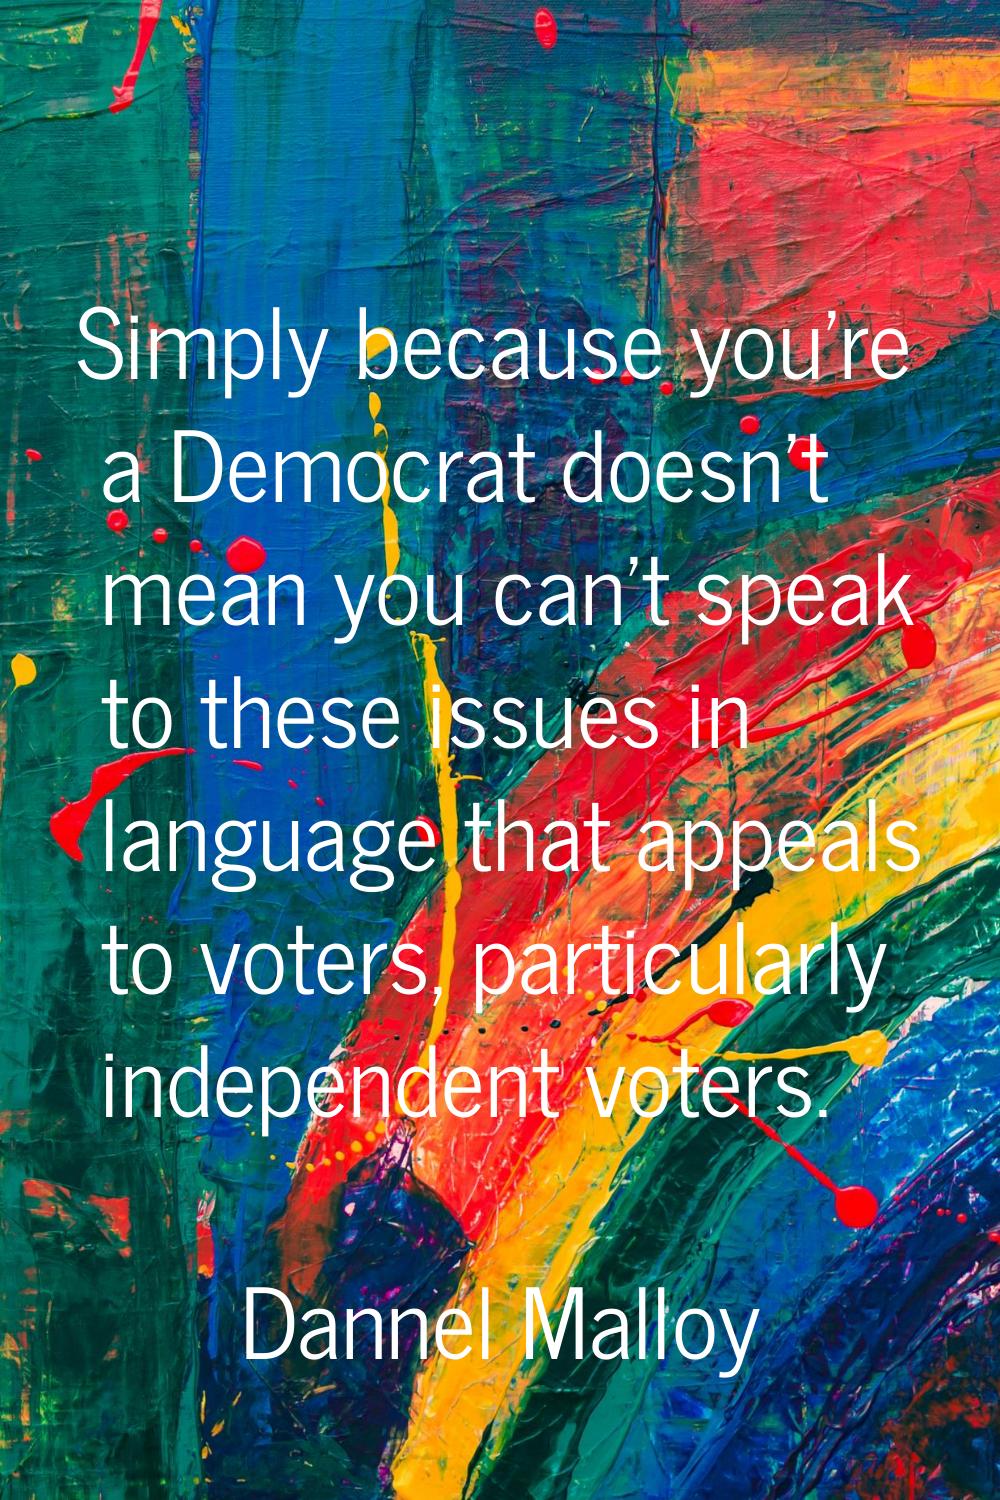 Simply because you're a Democrat doesn't mean you can't speak to these issues in language that appe